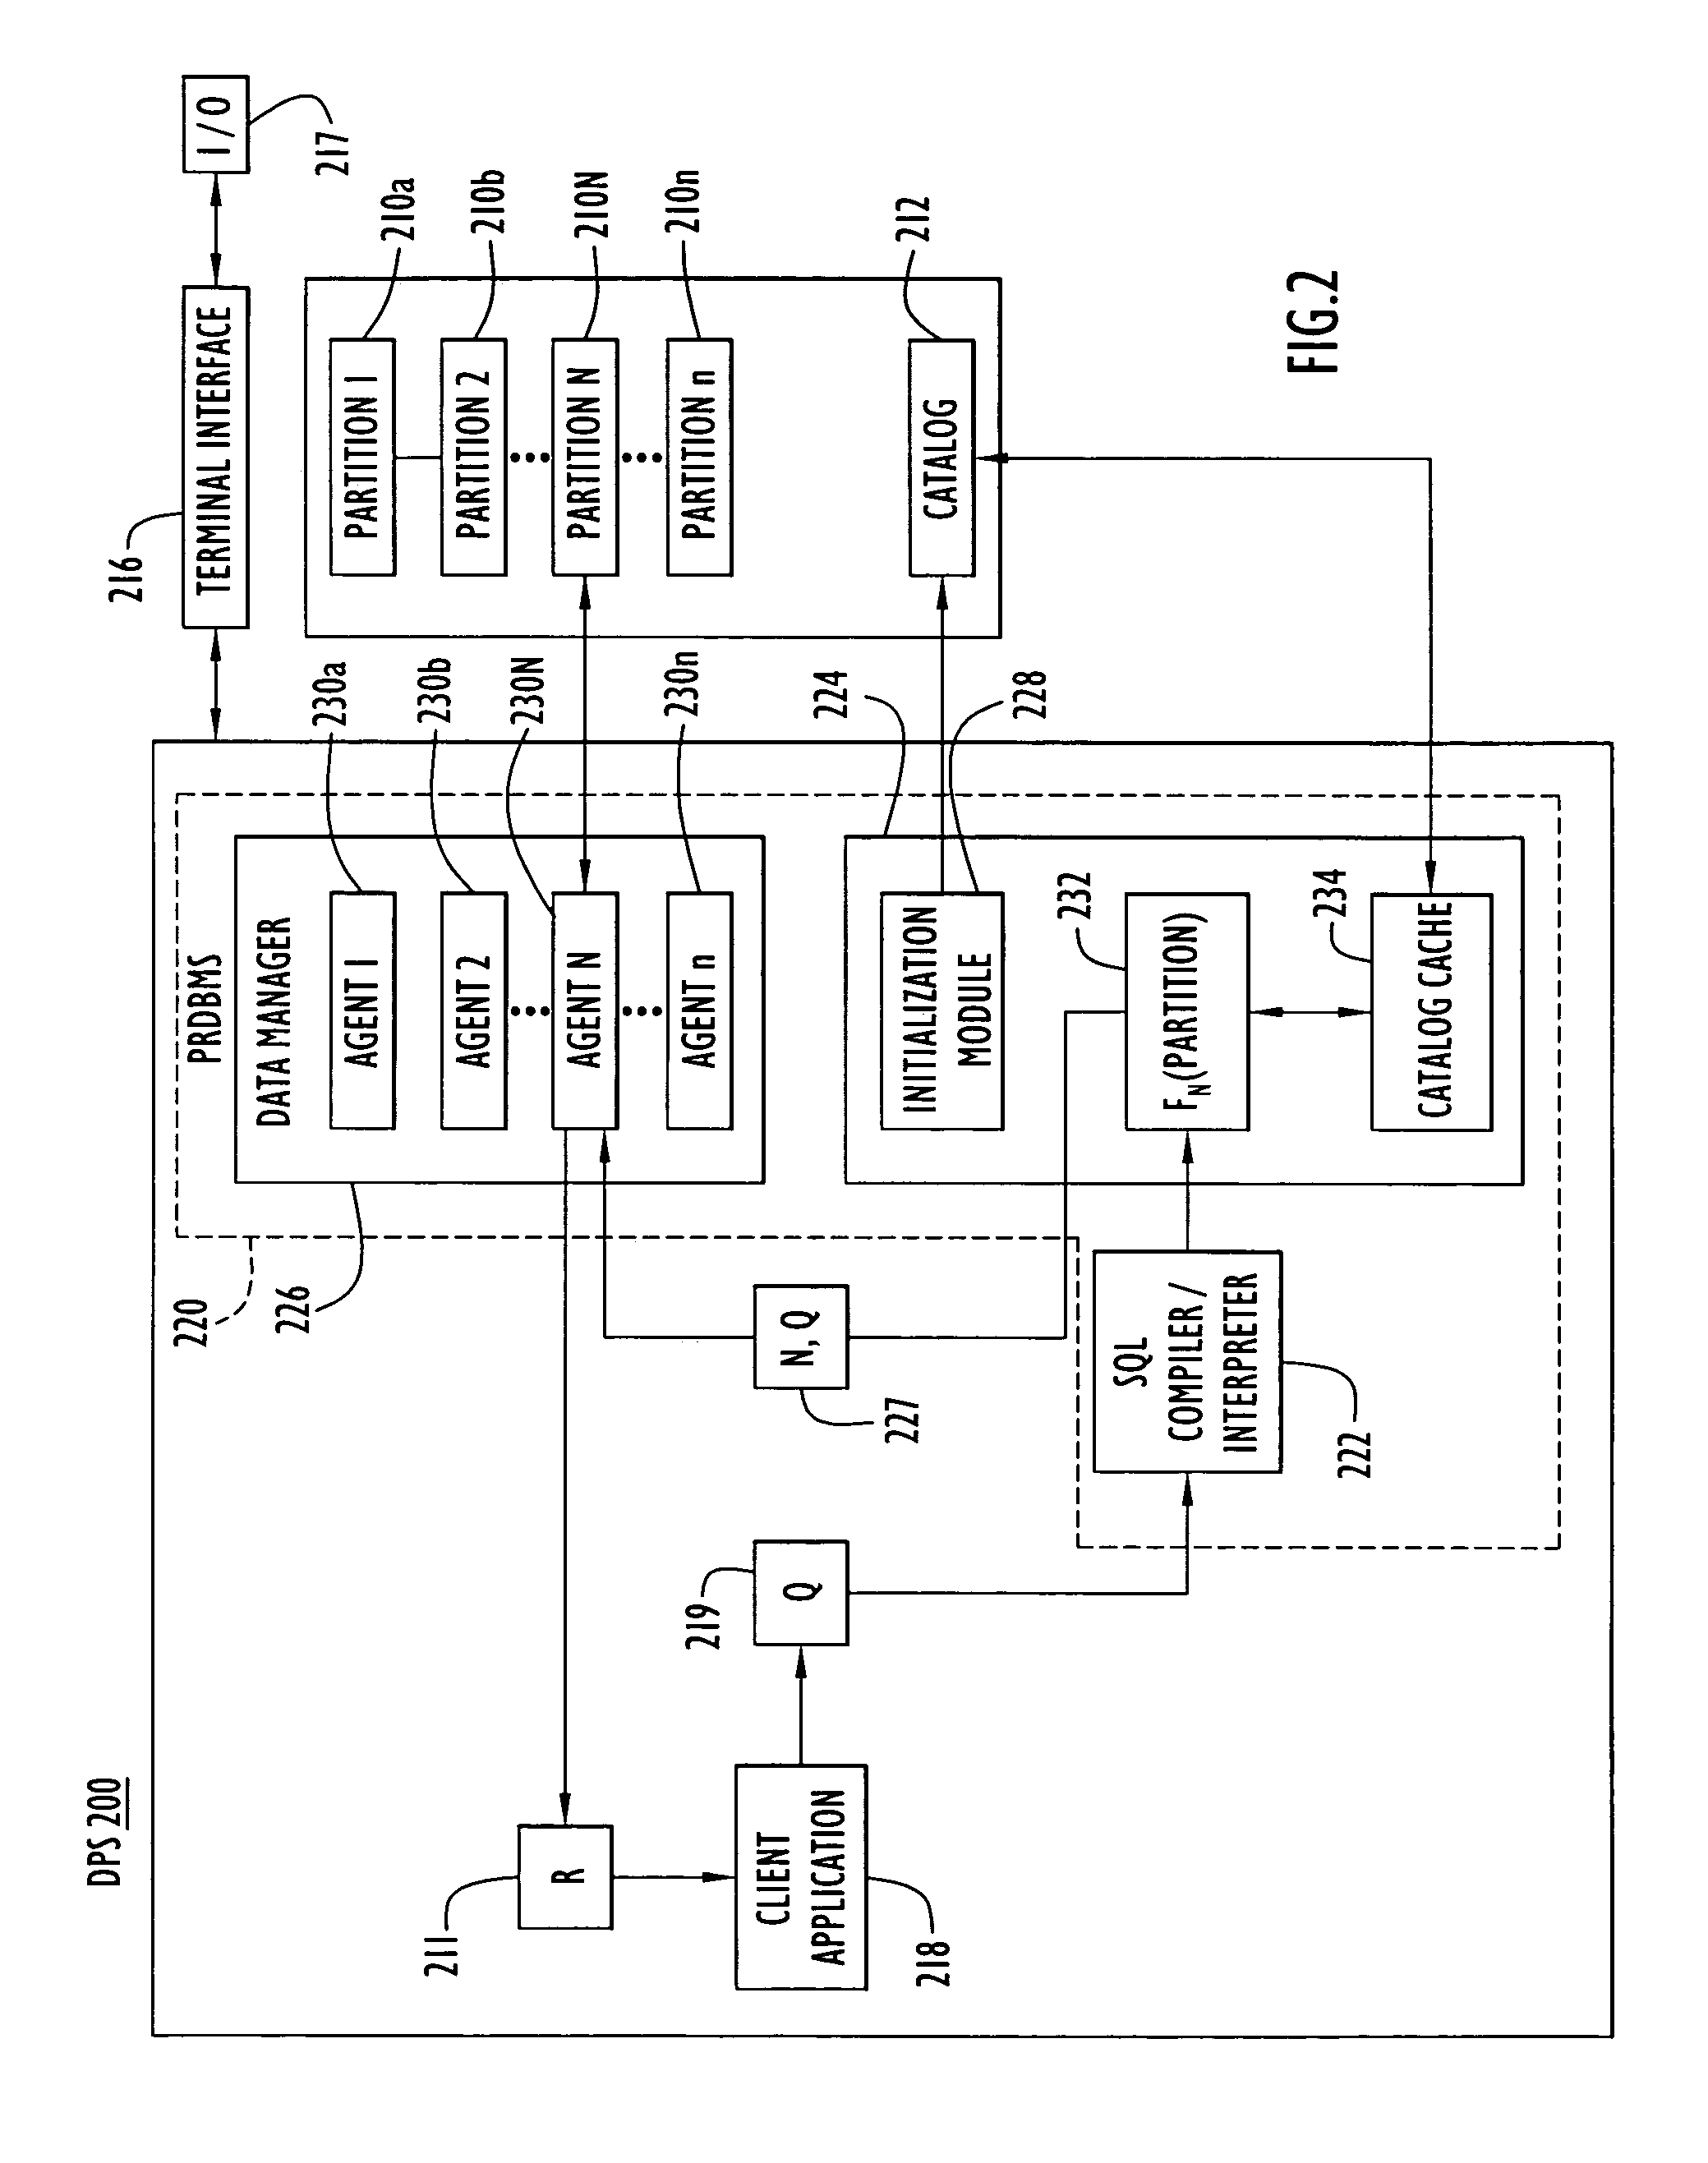 Method for executing a database query